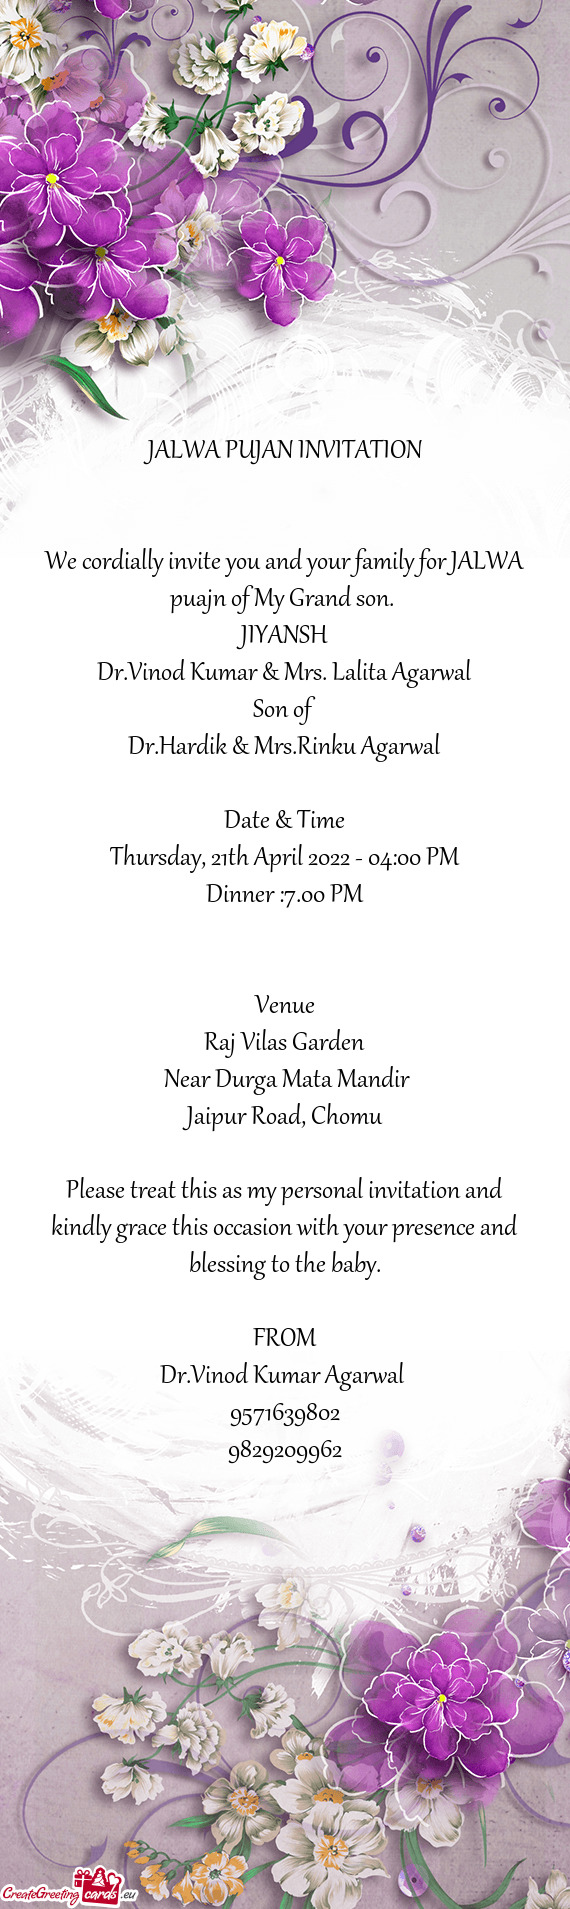 We cordially invite you and your family for JALWA puajn of My Grand son